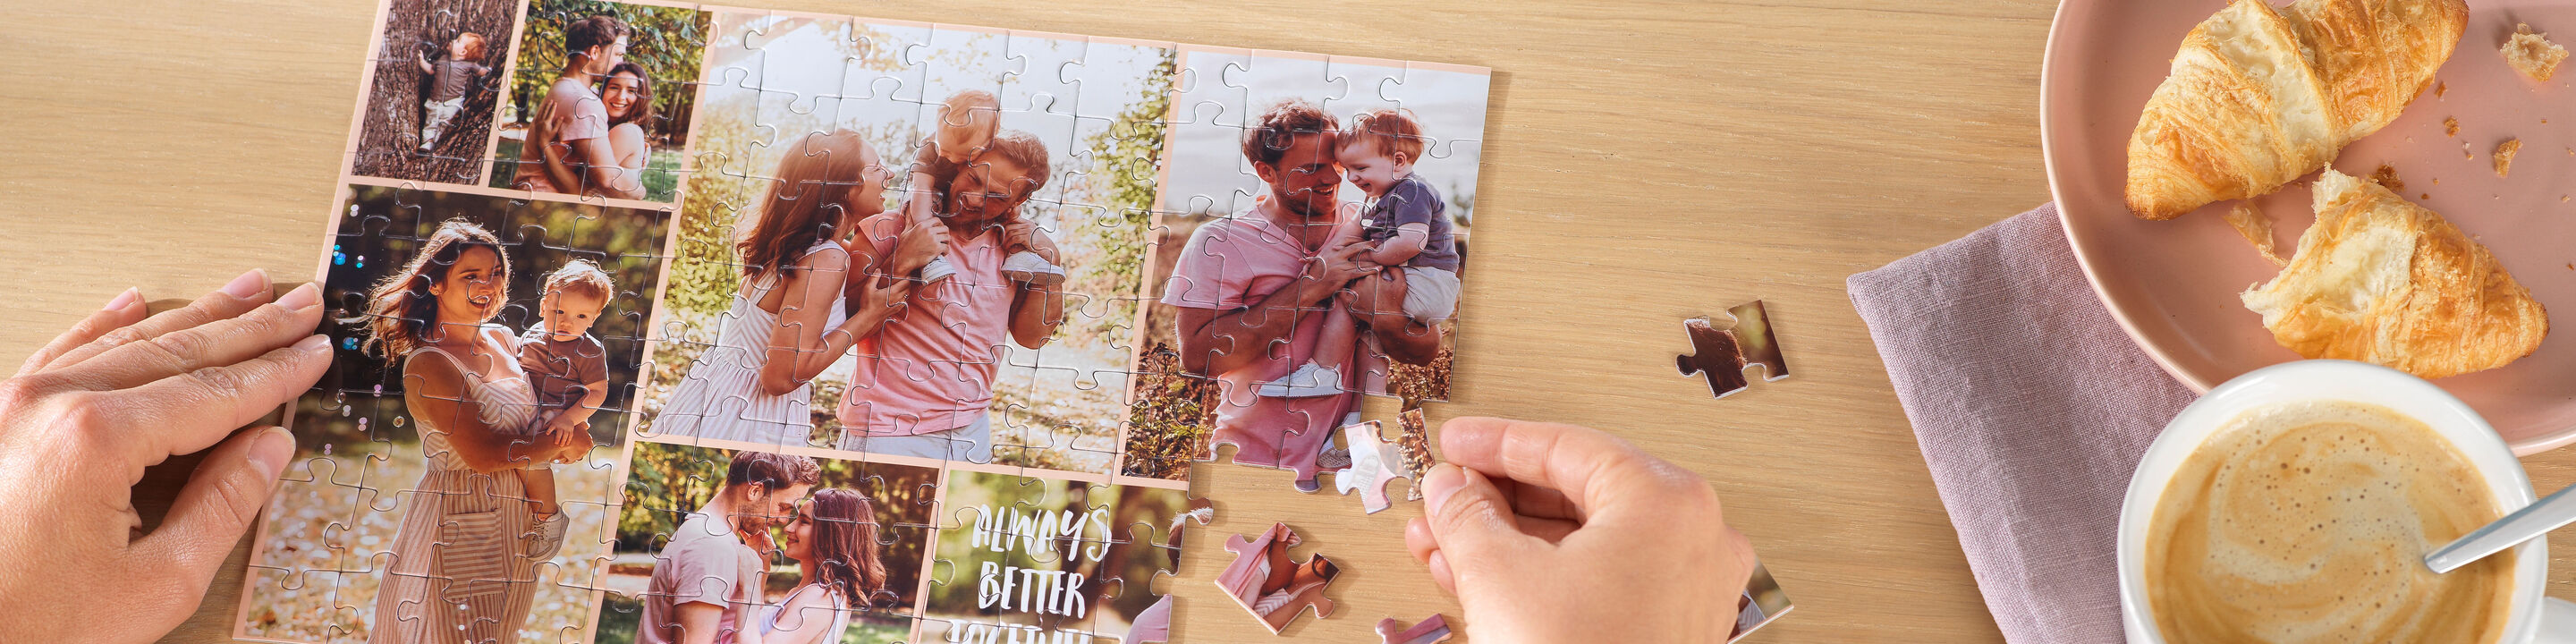 Personalised photo jigsaw of a family in summer